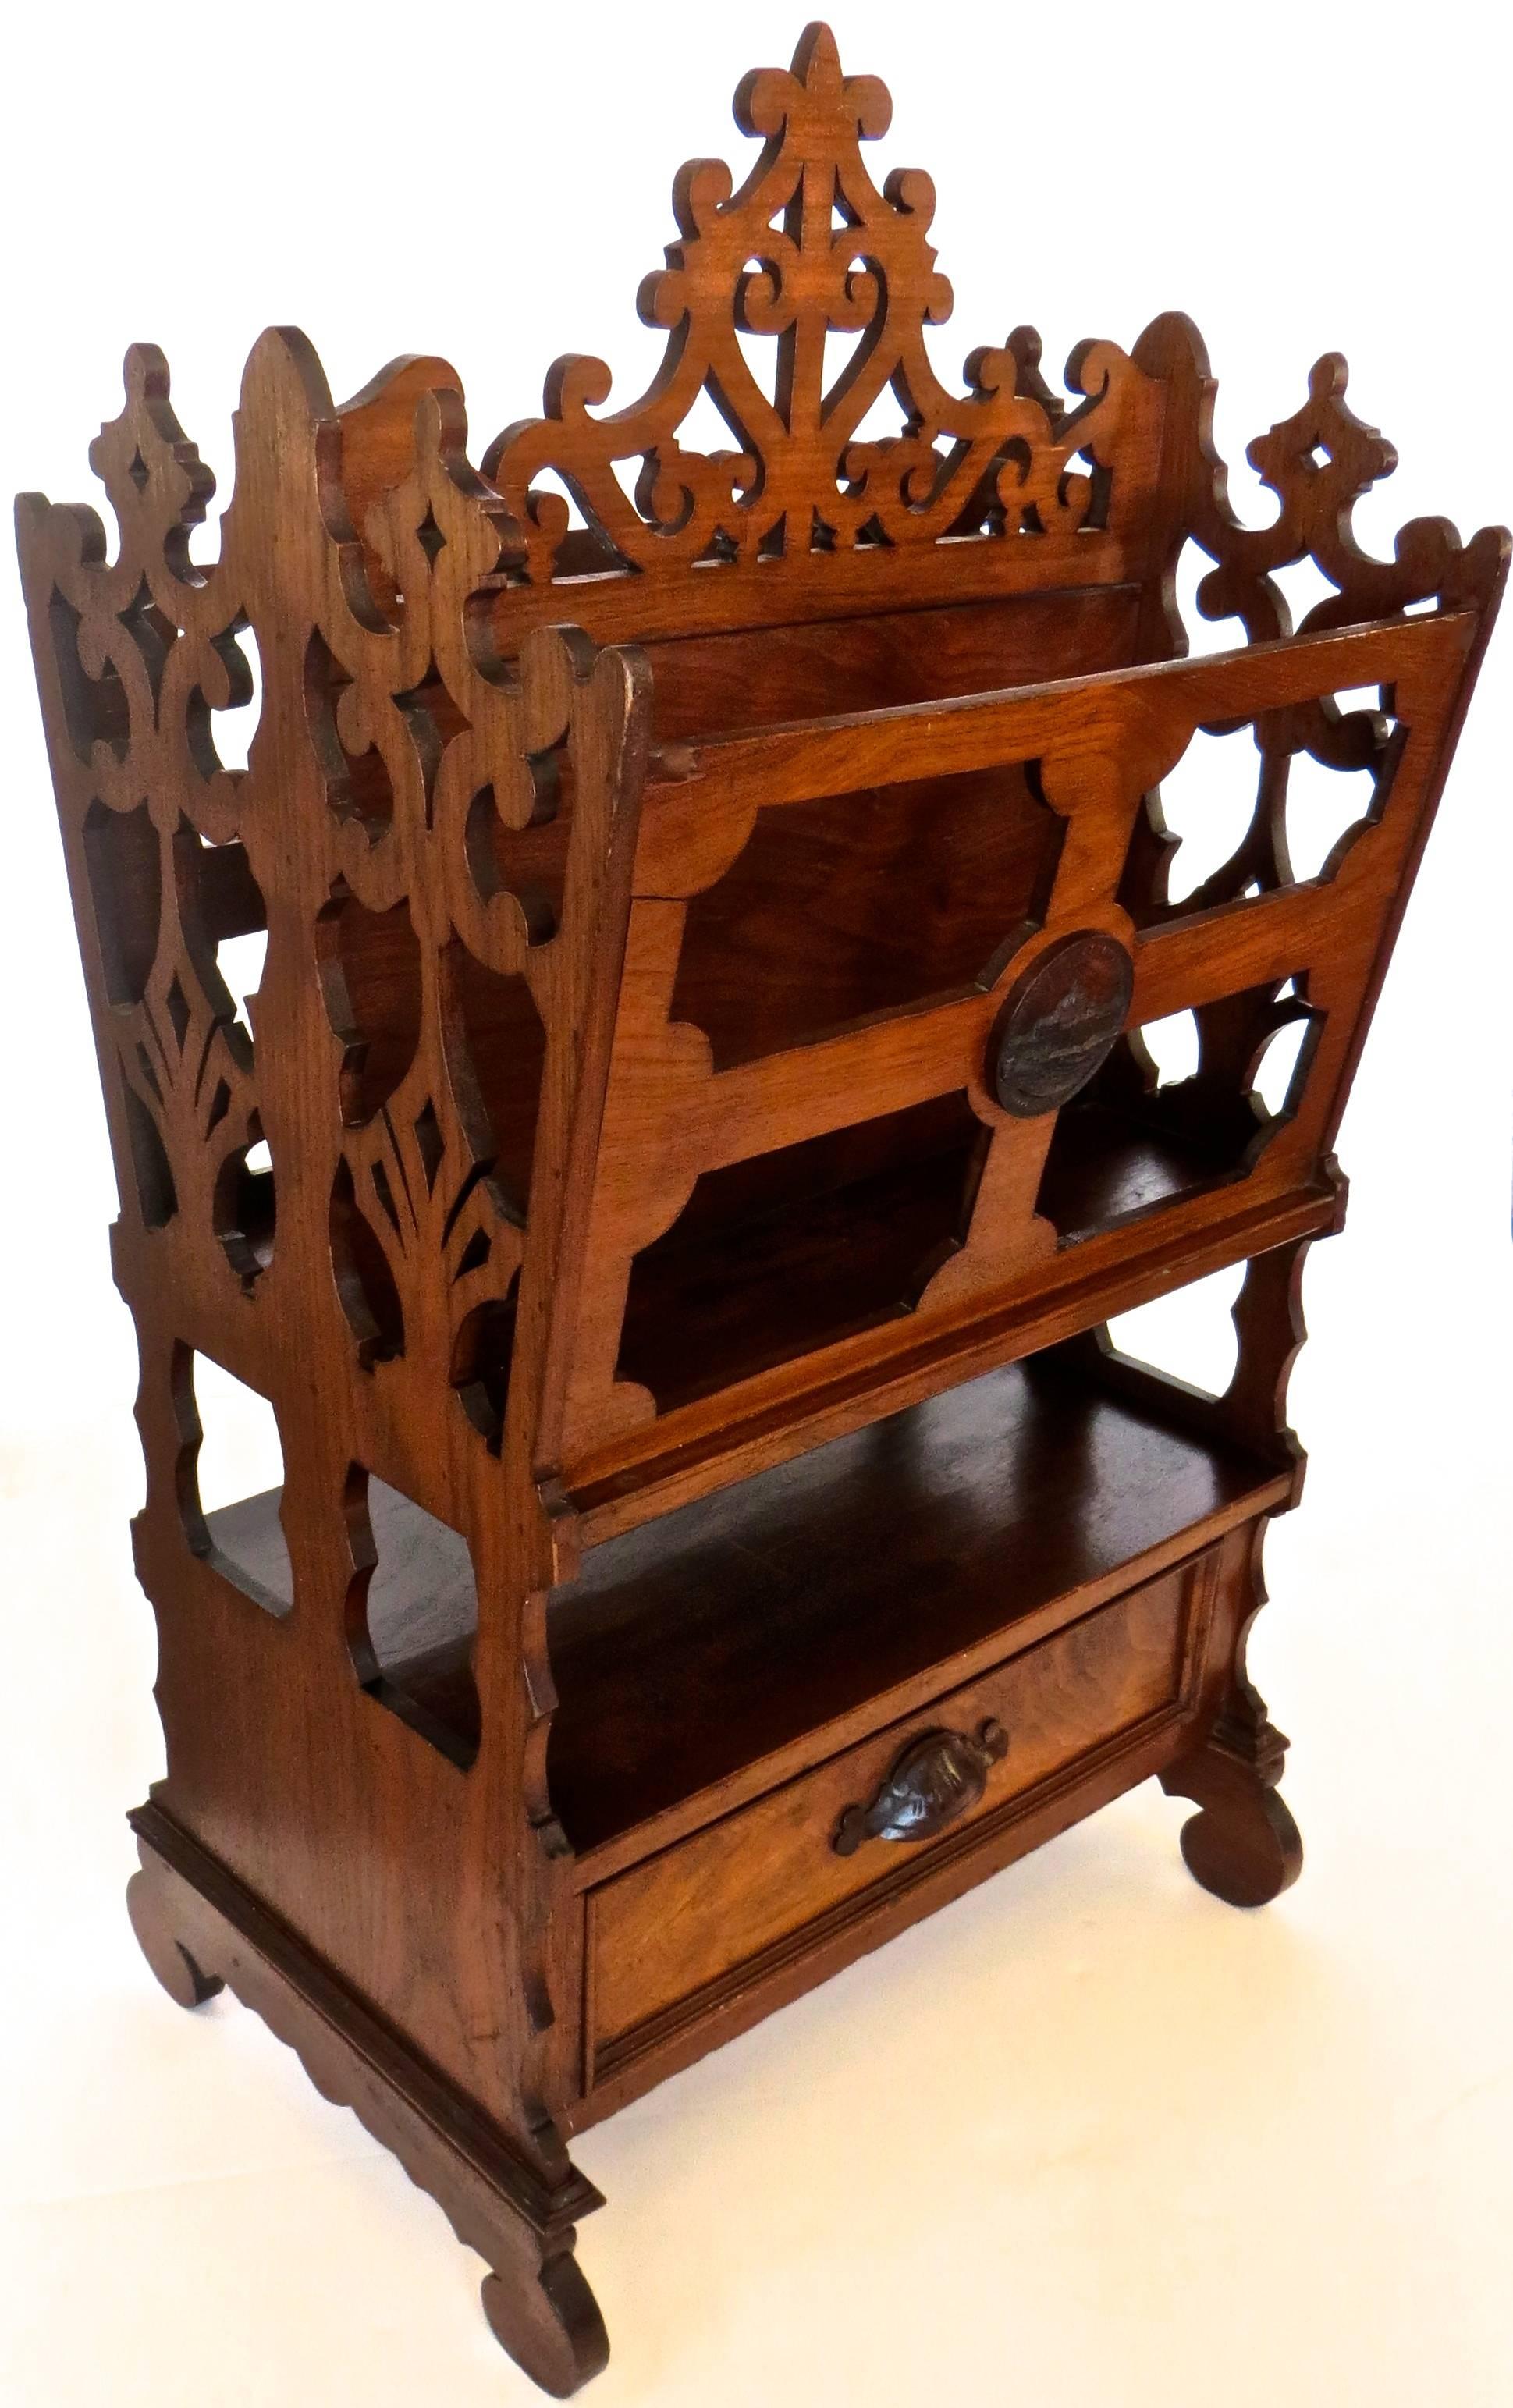 Fine quality American magazine rack (also known as a canterbury) exhibited at the Centennial Exhibition held in Philadelphia in 1876. Unusual to find an American example, as most are of English manufacture and quite ubiquitous. Of Charles Eastlake